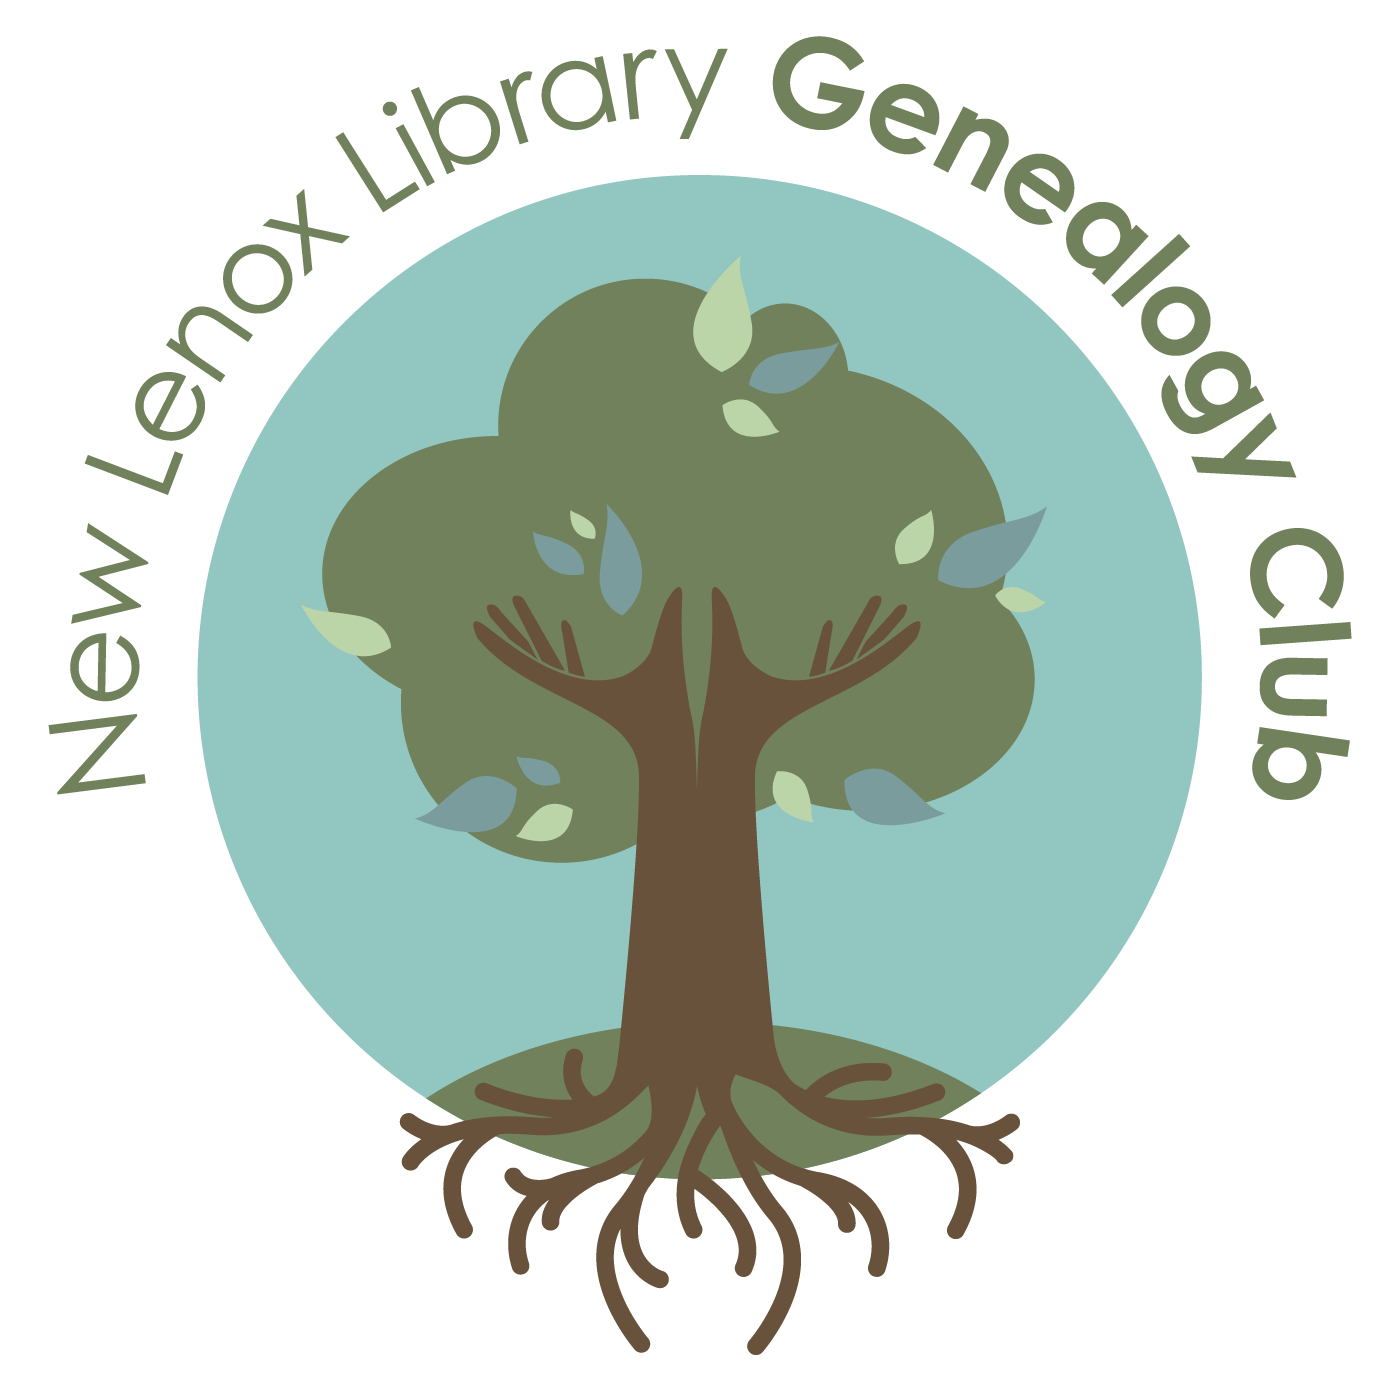 Green tree on a blue background with words "New Lenox Library Genealogy Club"